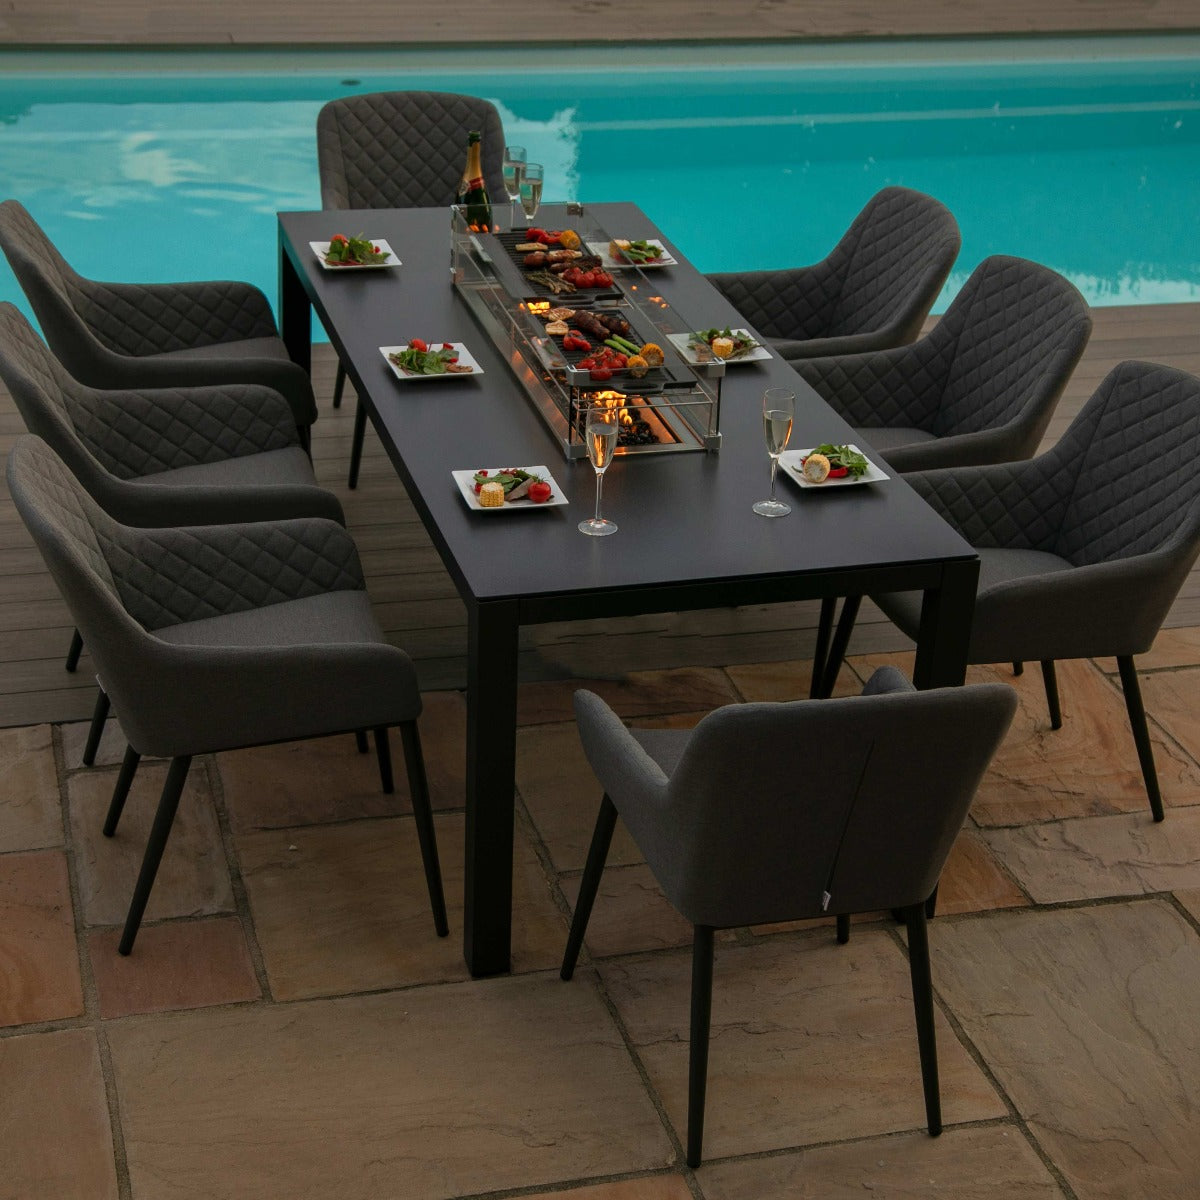 Outdoor Fabric Zest 8 Seat Rectangular Dining Set with Fire Pit Table - Flanelle